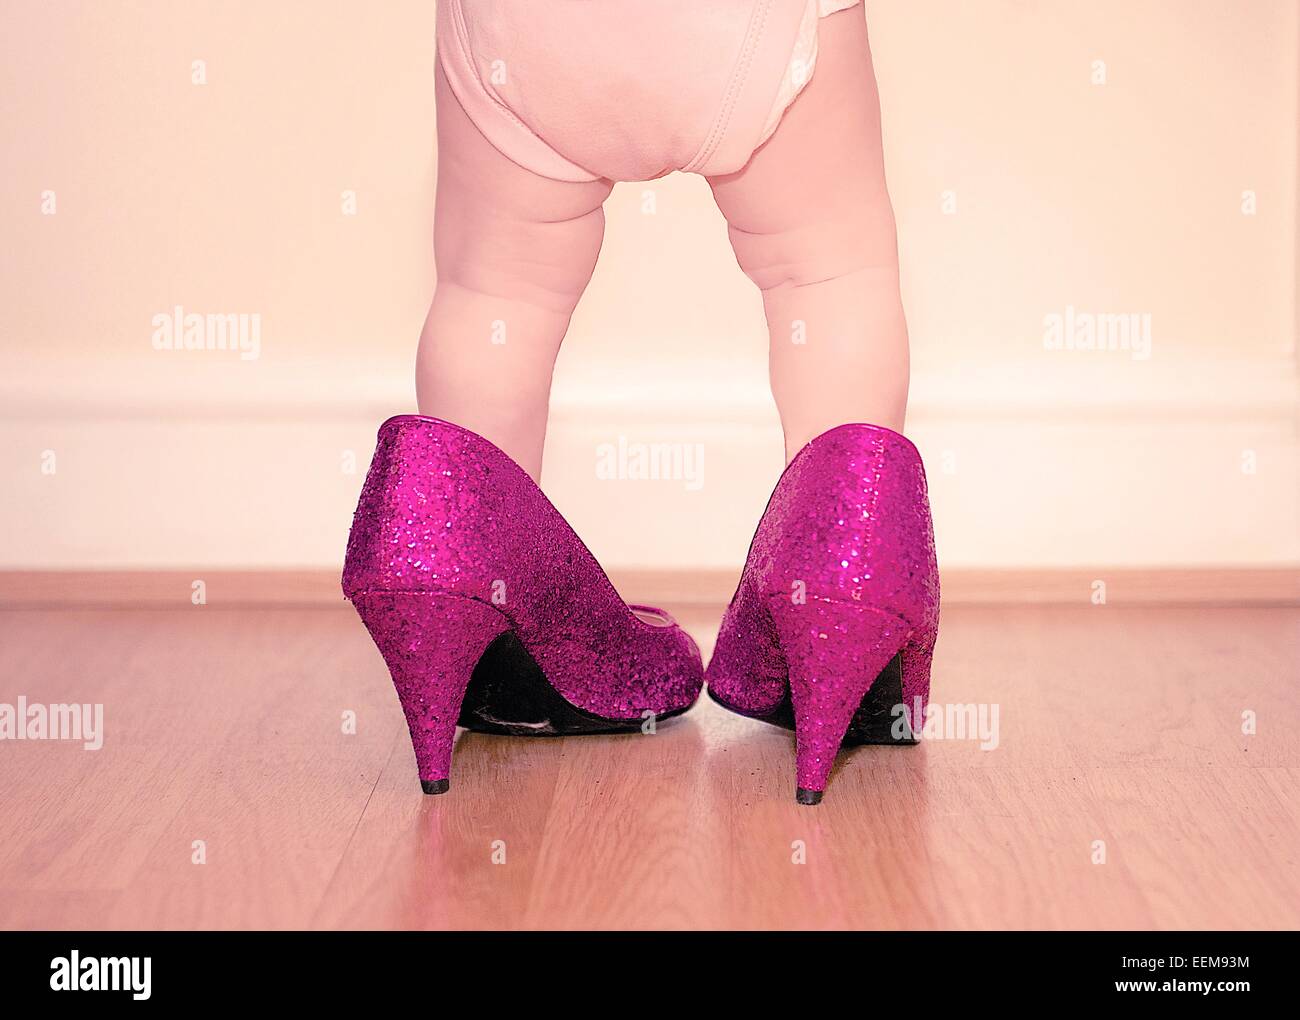 Toddler wearing mother's shoes Stock Photo